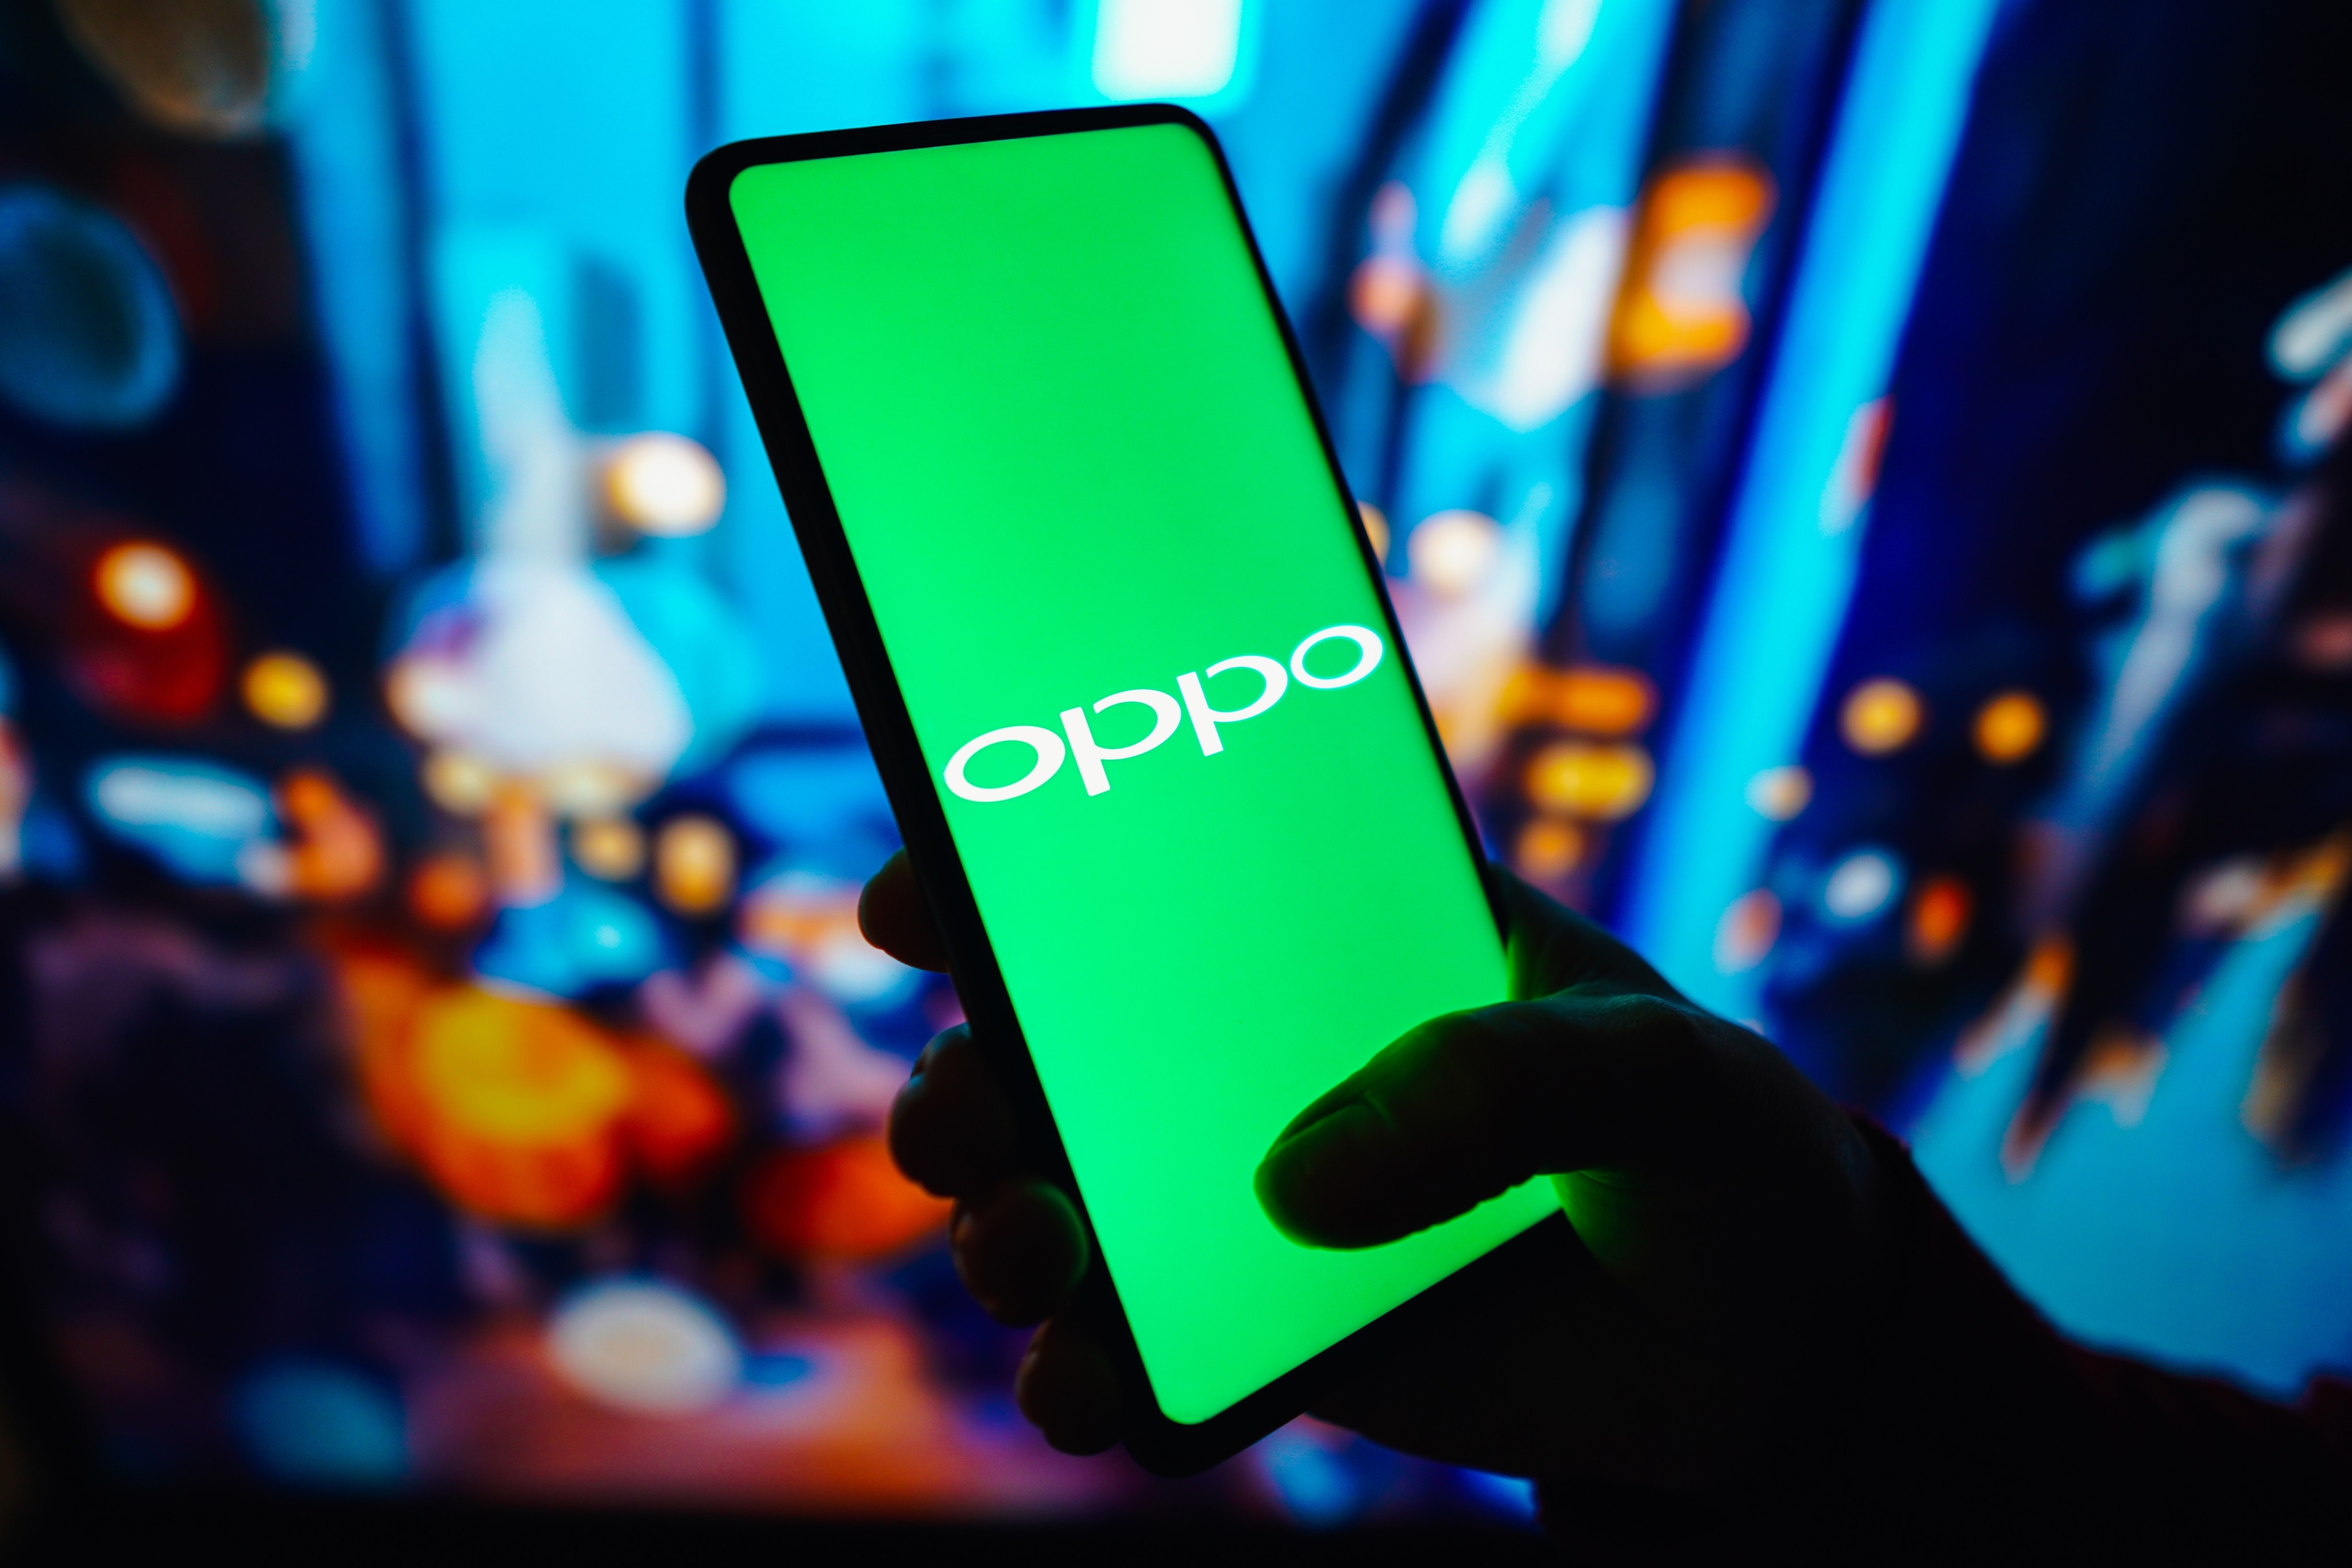 Smartphone giant Oppo’s decision to disband chip design unit Zeku marks another blow to China’s semiconductor development ambitions. Photo: Shutterstock